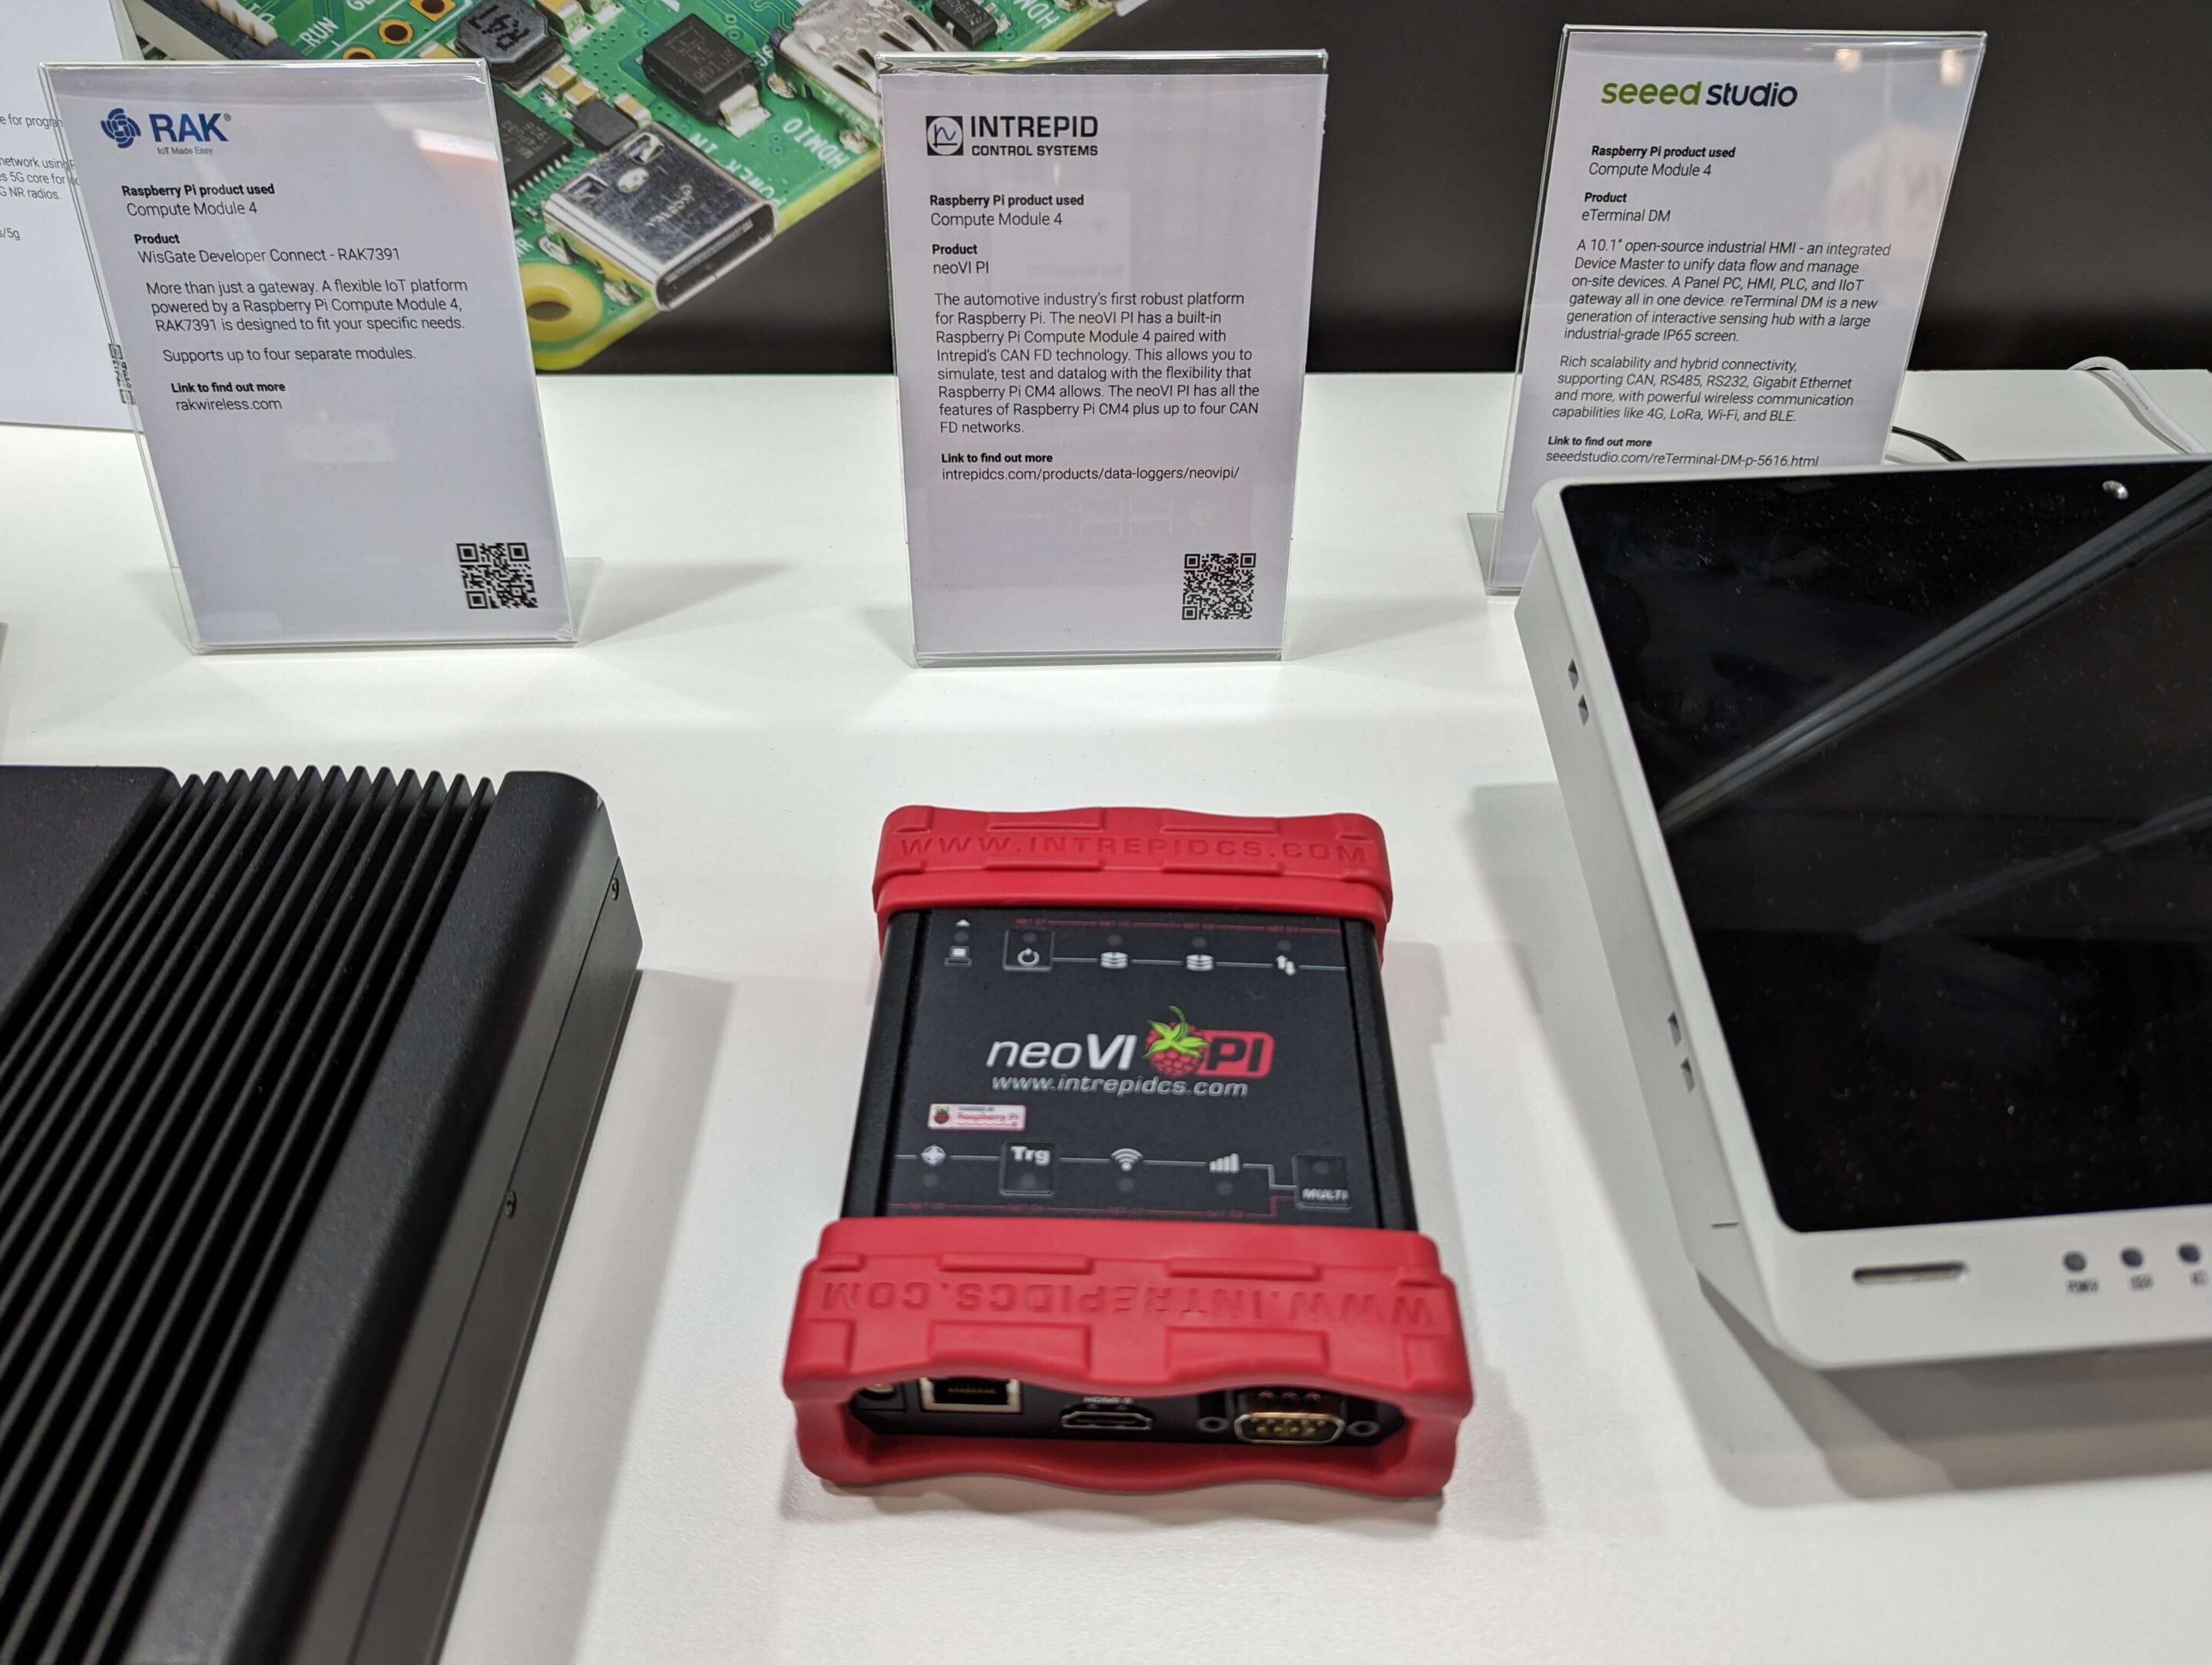 Intrepid’s neoVI PI Product Showcased at Raspberry Pi’s Booth in Embedded World 2023